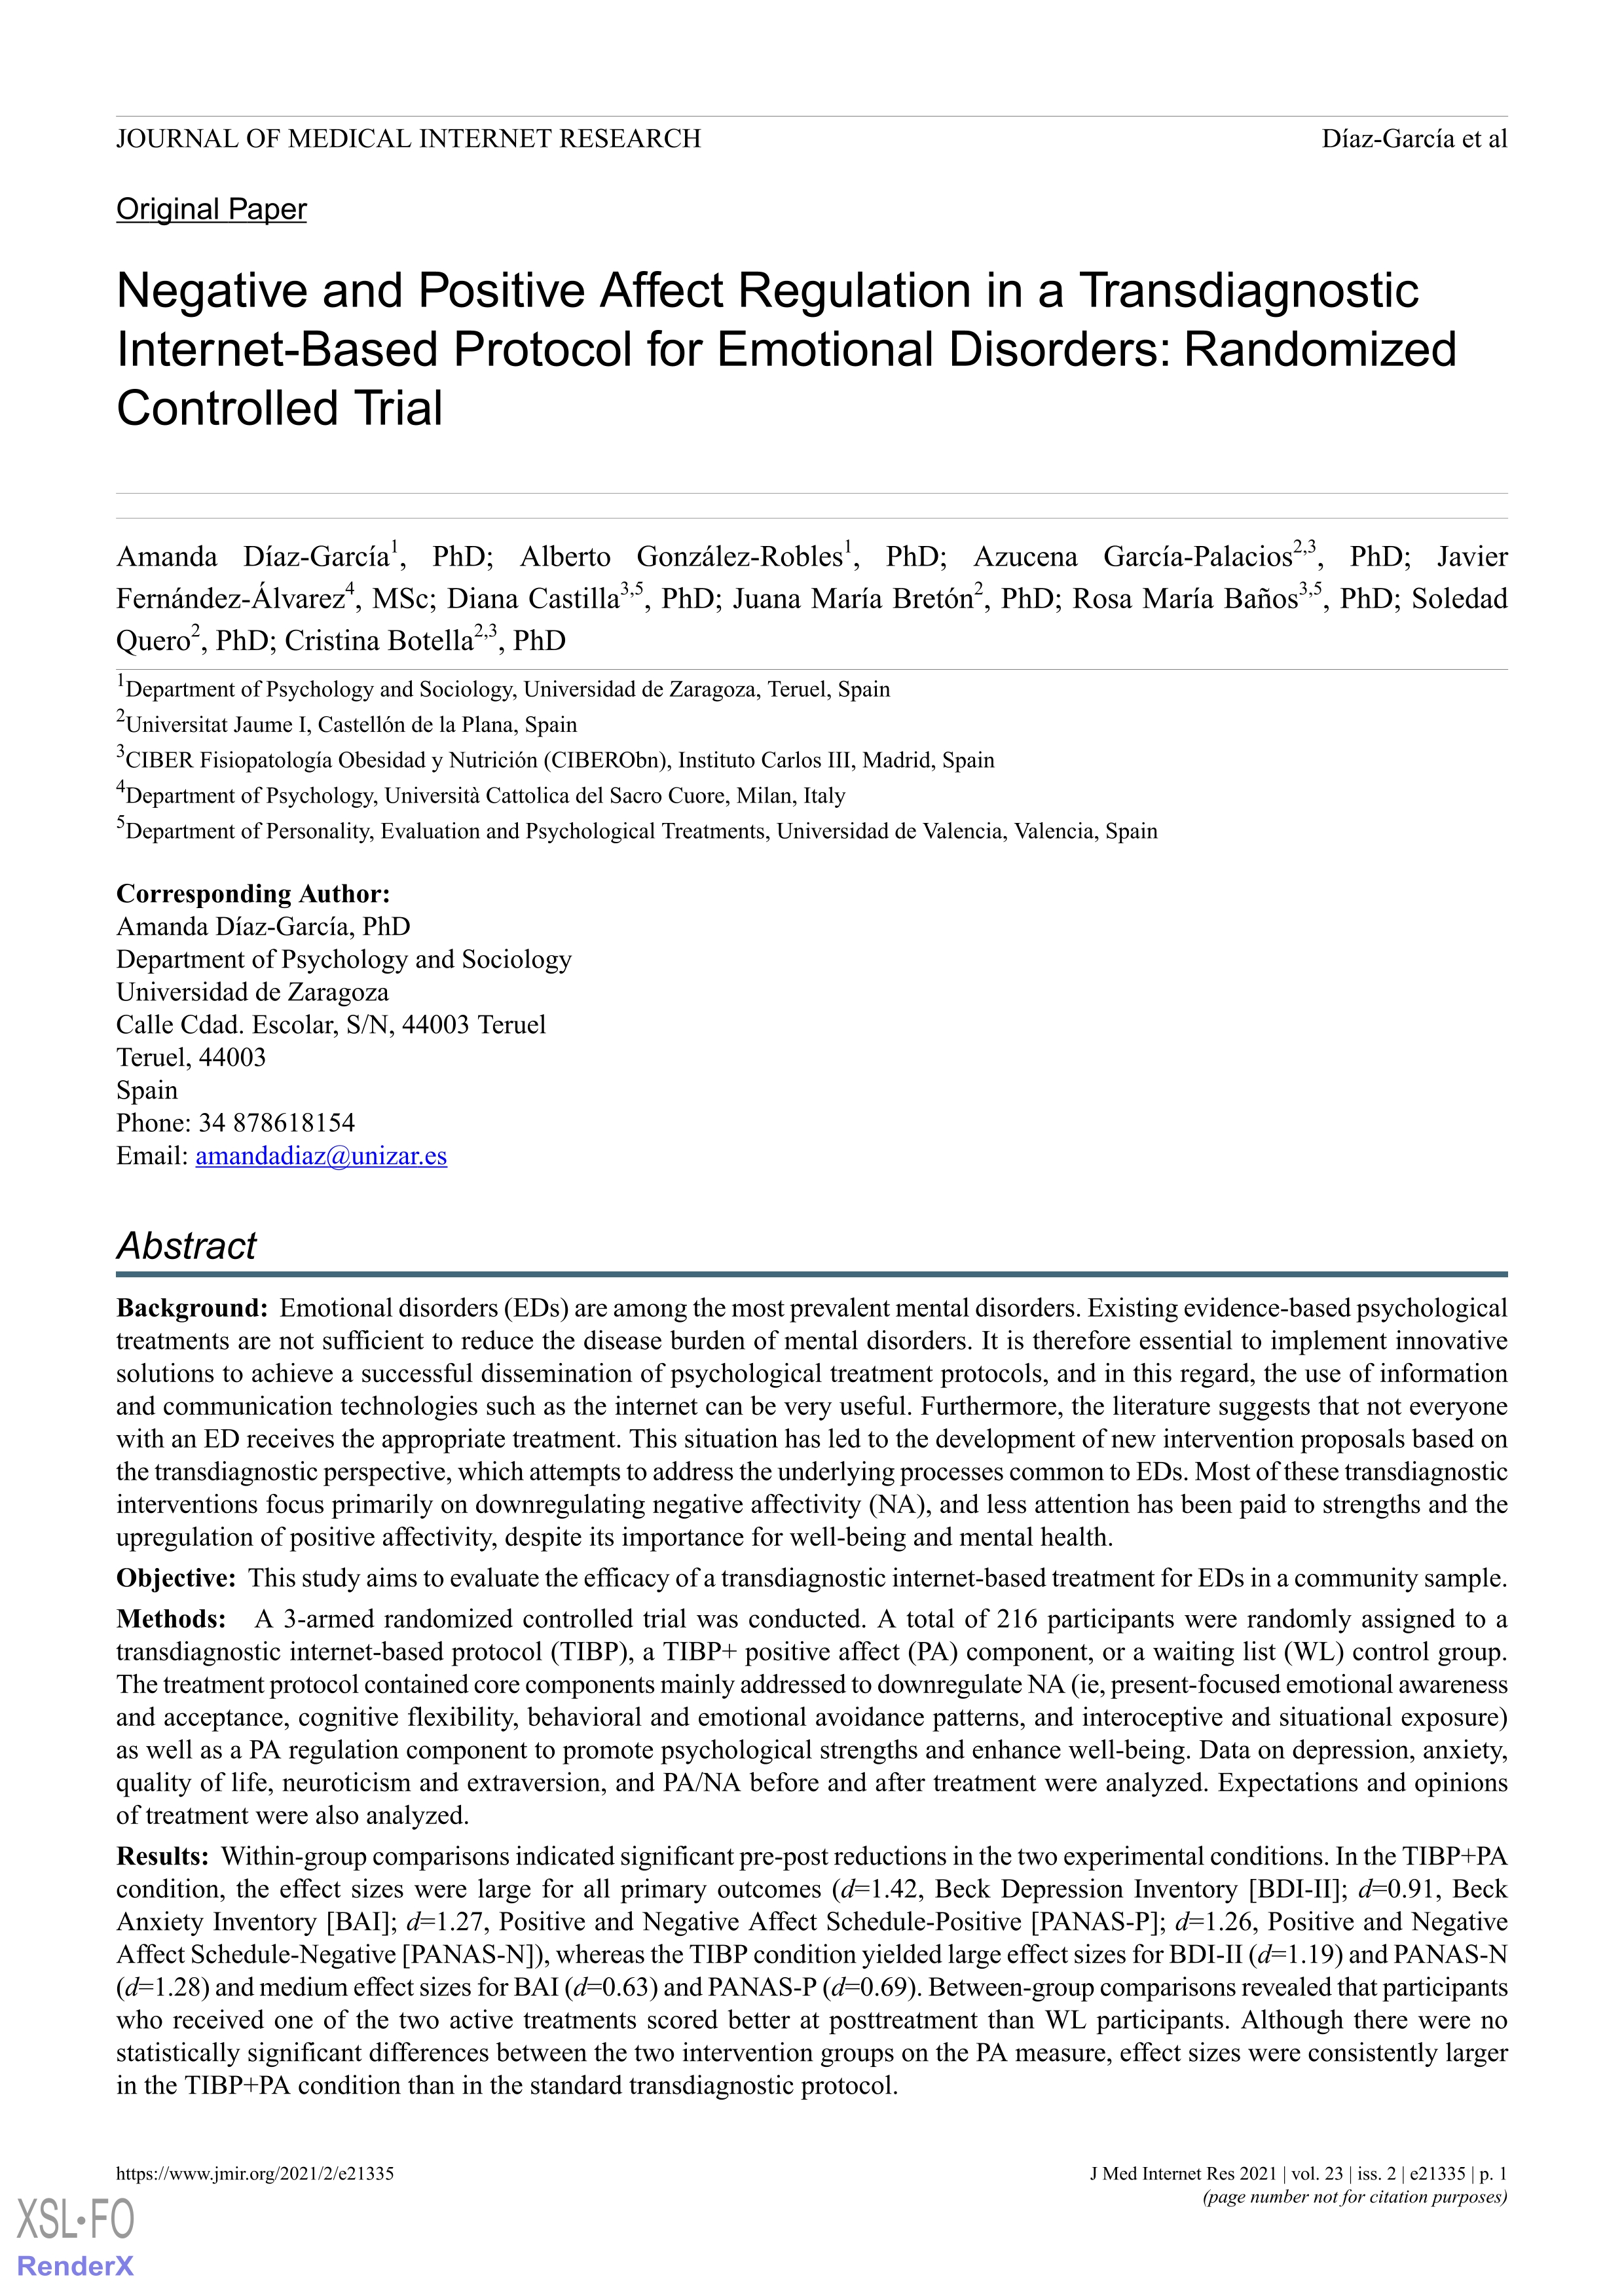 Negative and positive affect regulation in a transdiagnostic internet-based protocol for emotional disorders: Randomized controlled trial